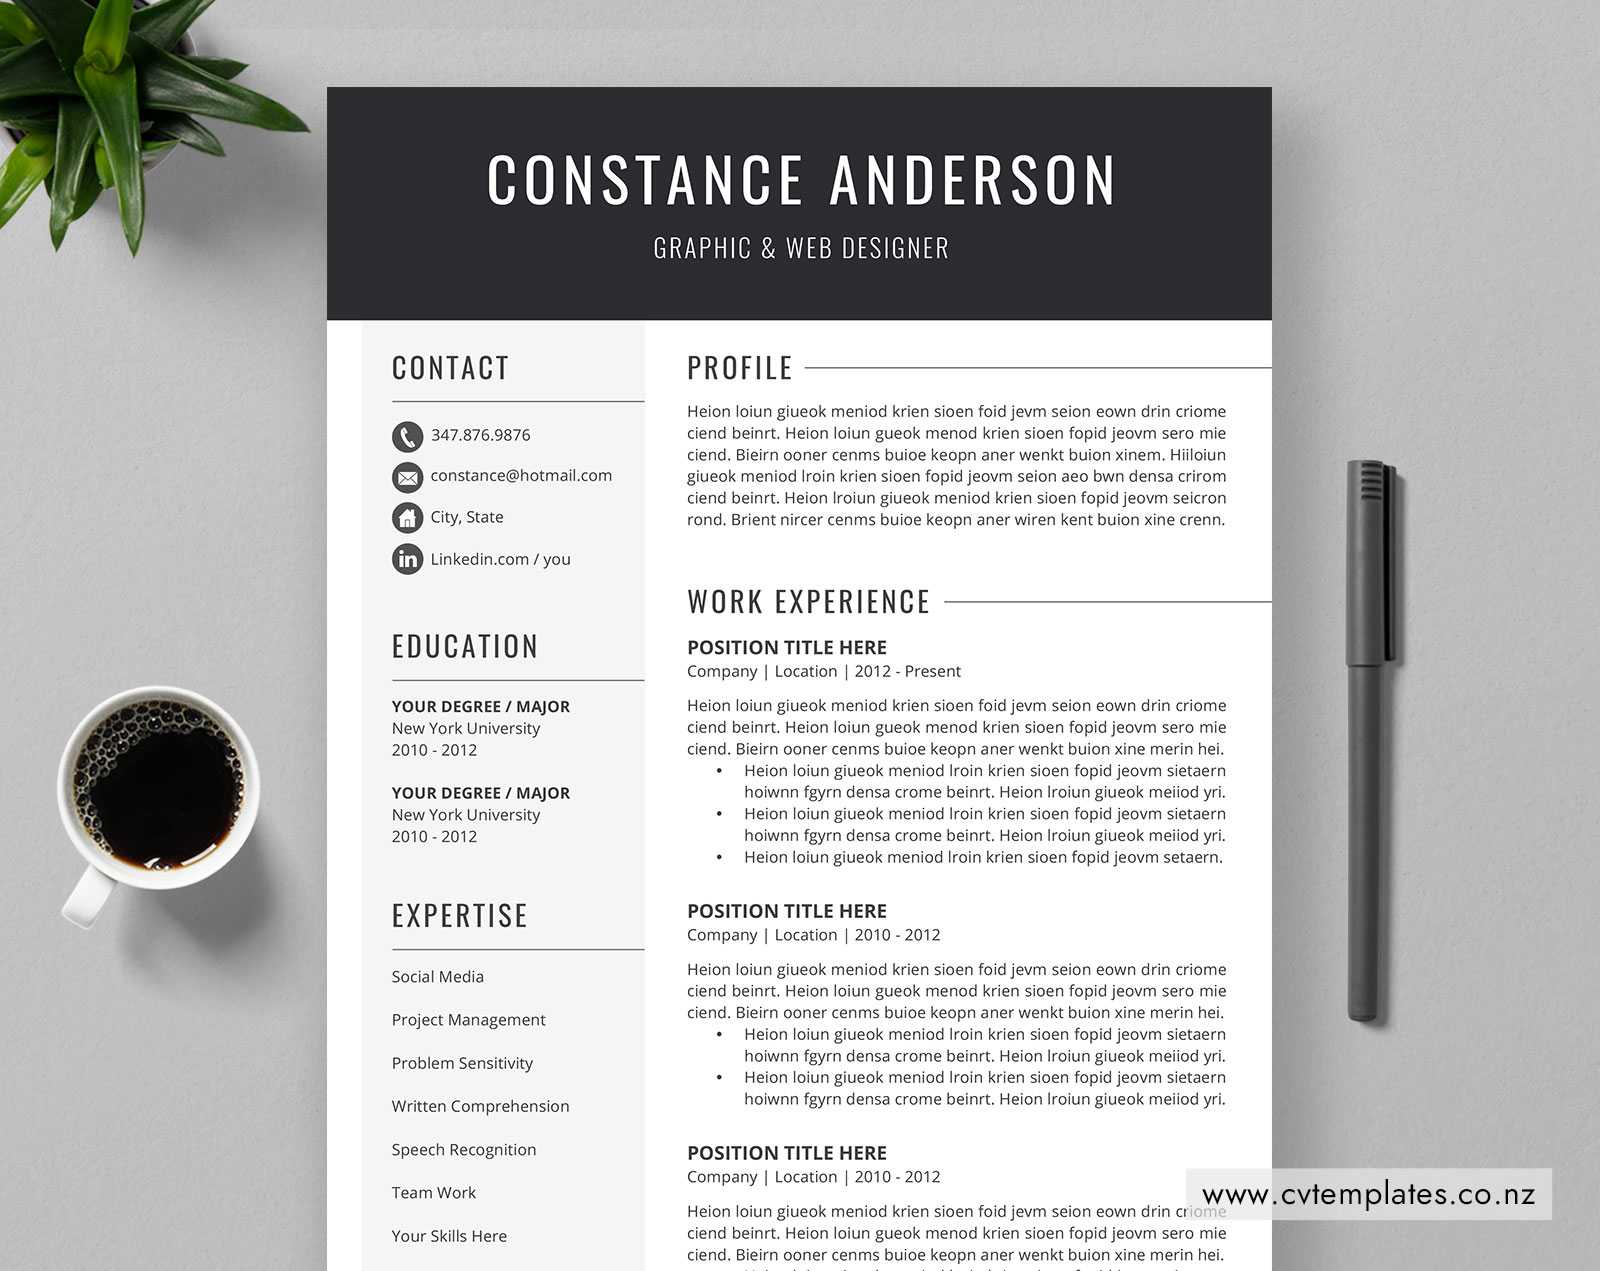 Cv Template For Ms Word, Curriculum Vitae, Professional Cv Template Design,  Editable Cv Template, Cover Letter, References, 1, 2 And 3 Page Resume Inside Free Downloadable Resume Templates For Word